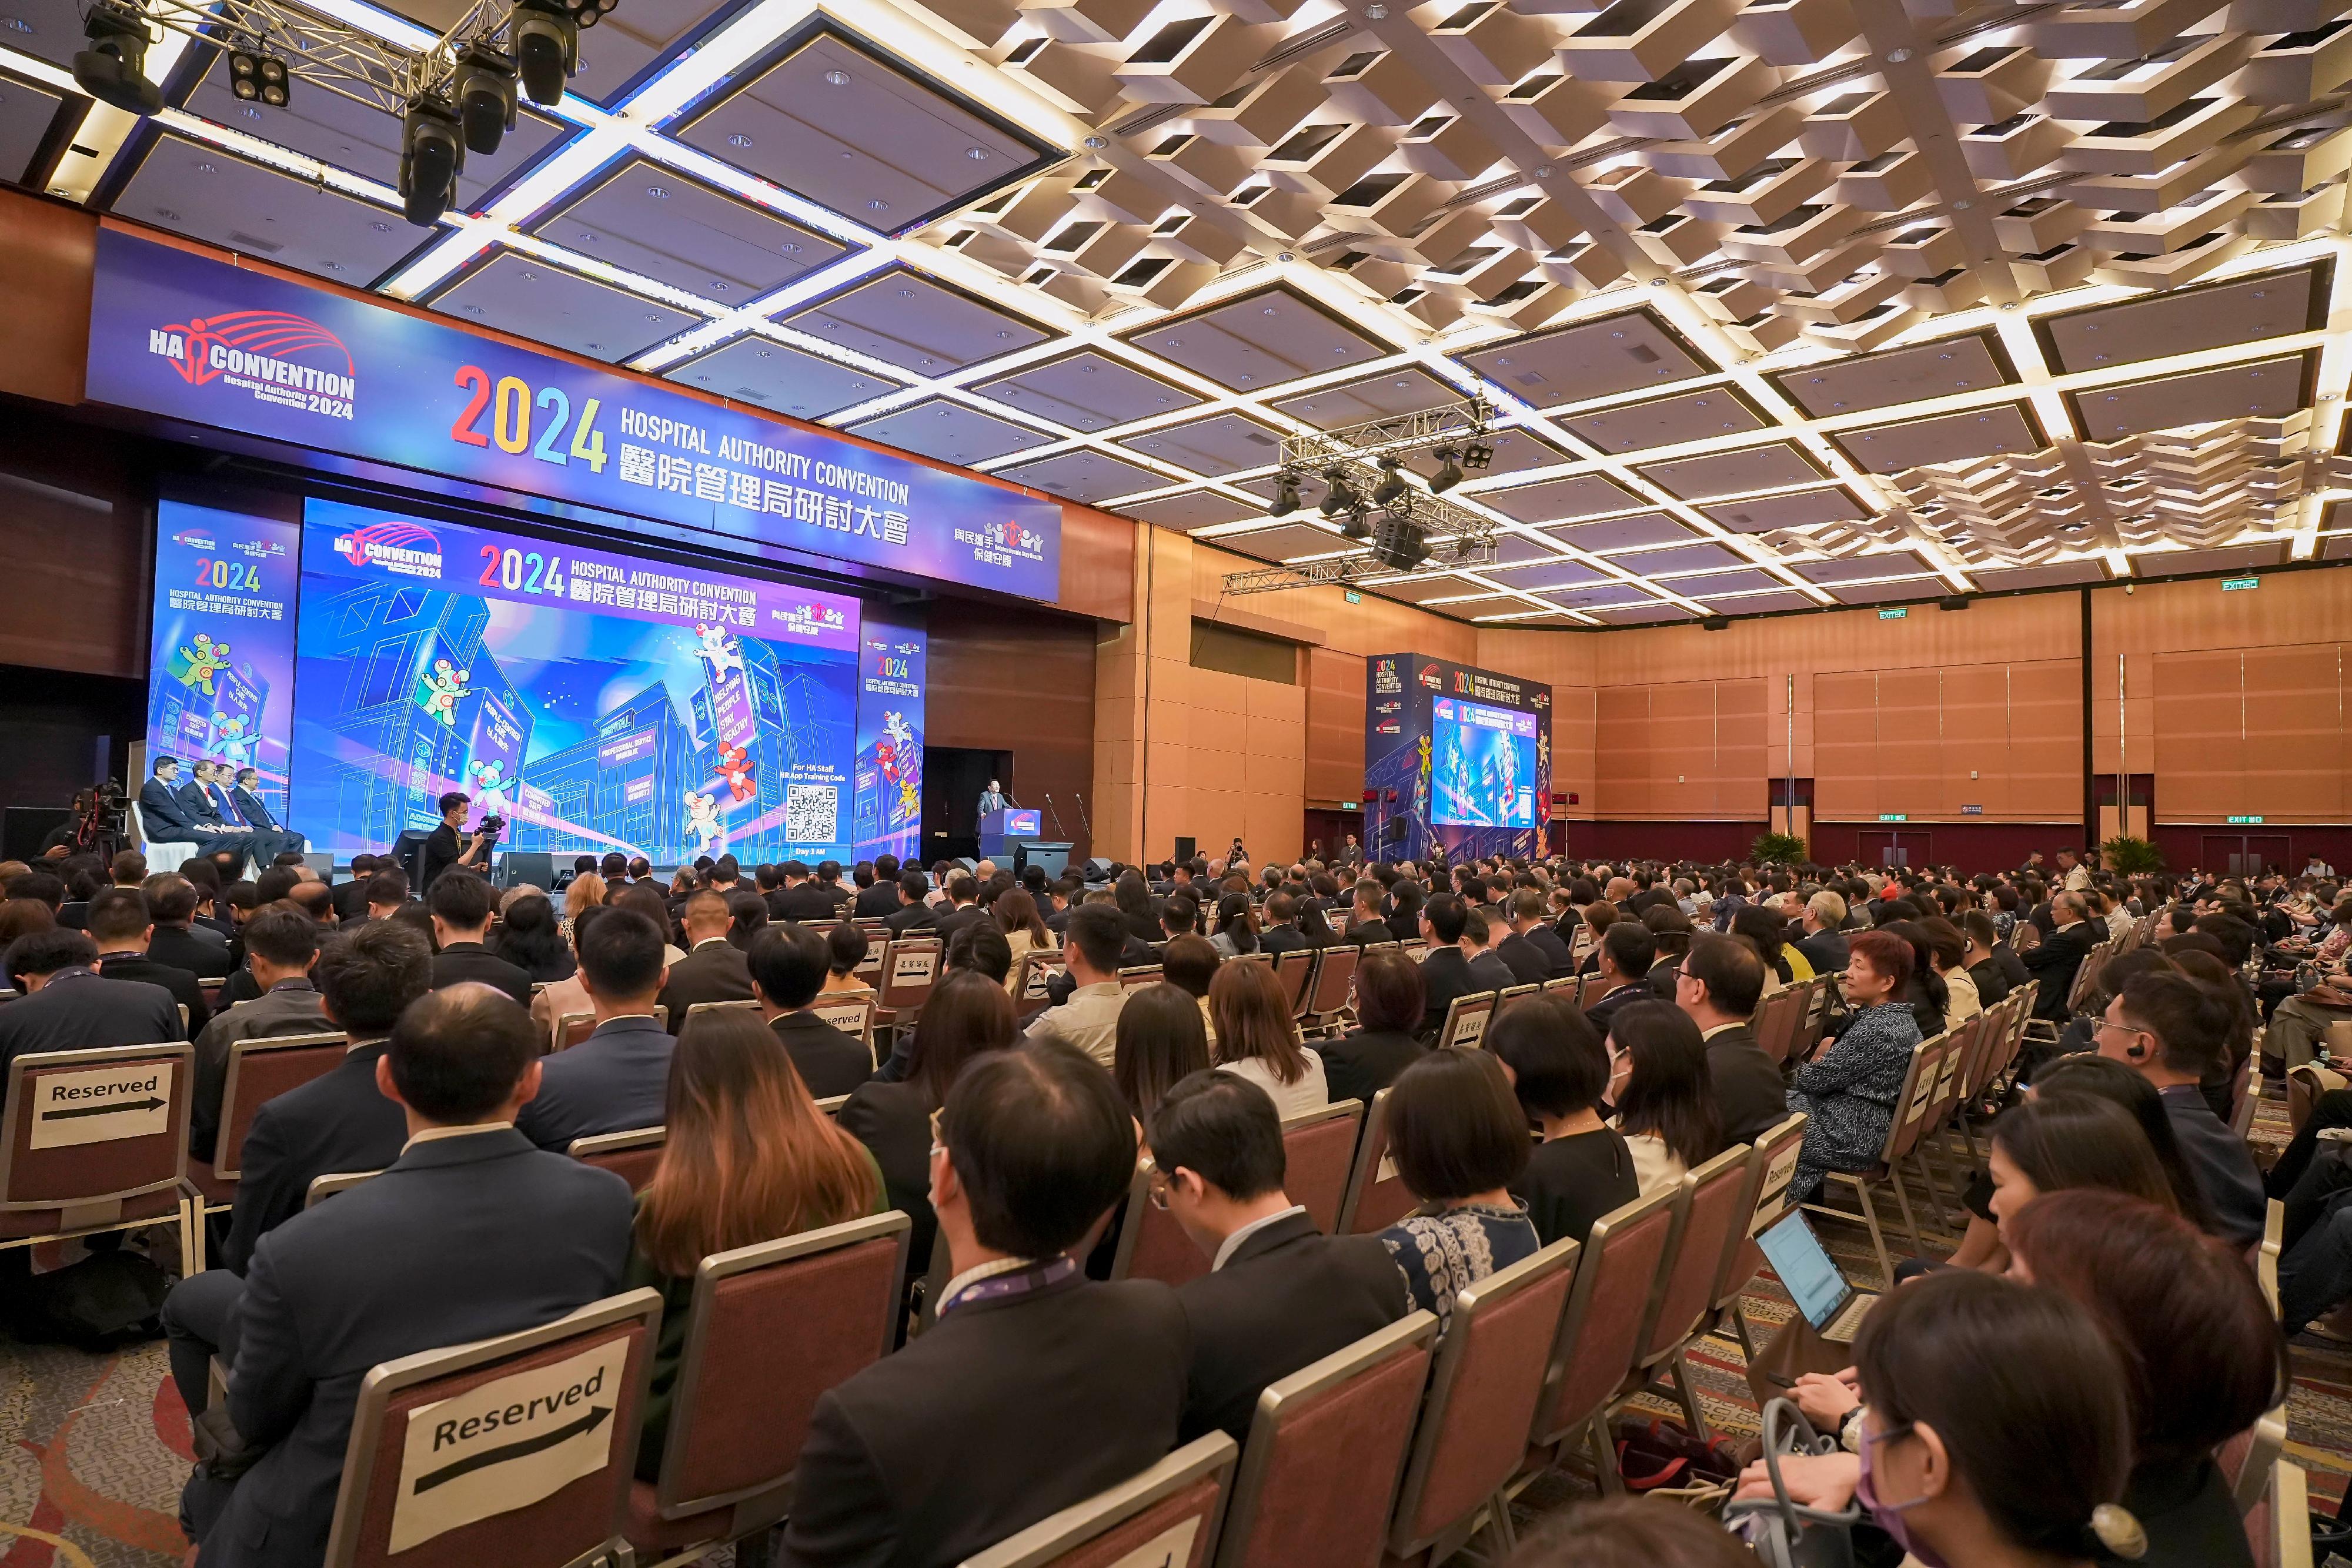 The Hospital Authority Convention 2022 is being held in both physical and virtual formats today and tomorrow (May 16 and 17), with around 160 overseas, Mainland and local distinguished speakers sharing their knowledge and insights on various health topics of interest with over 7 000 healthcare and academic professionals.